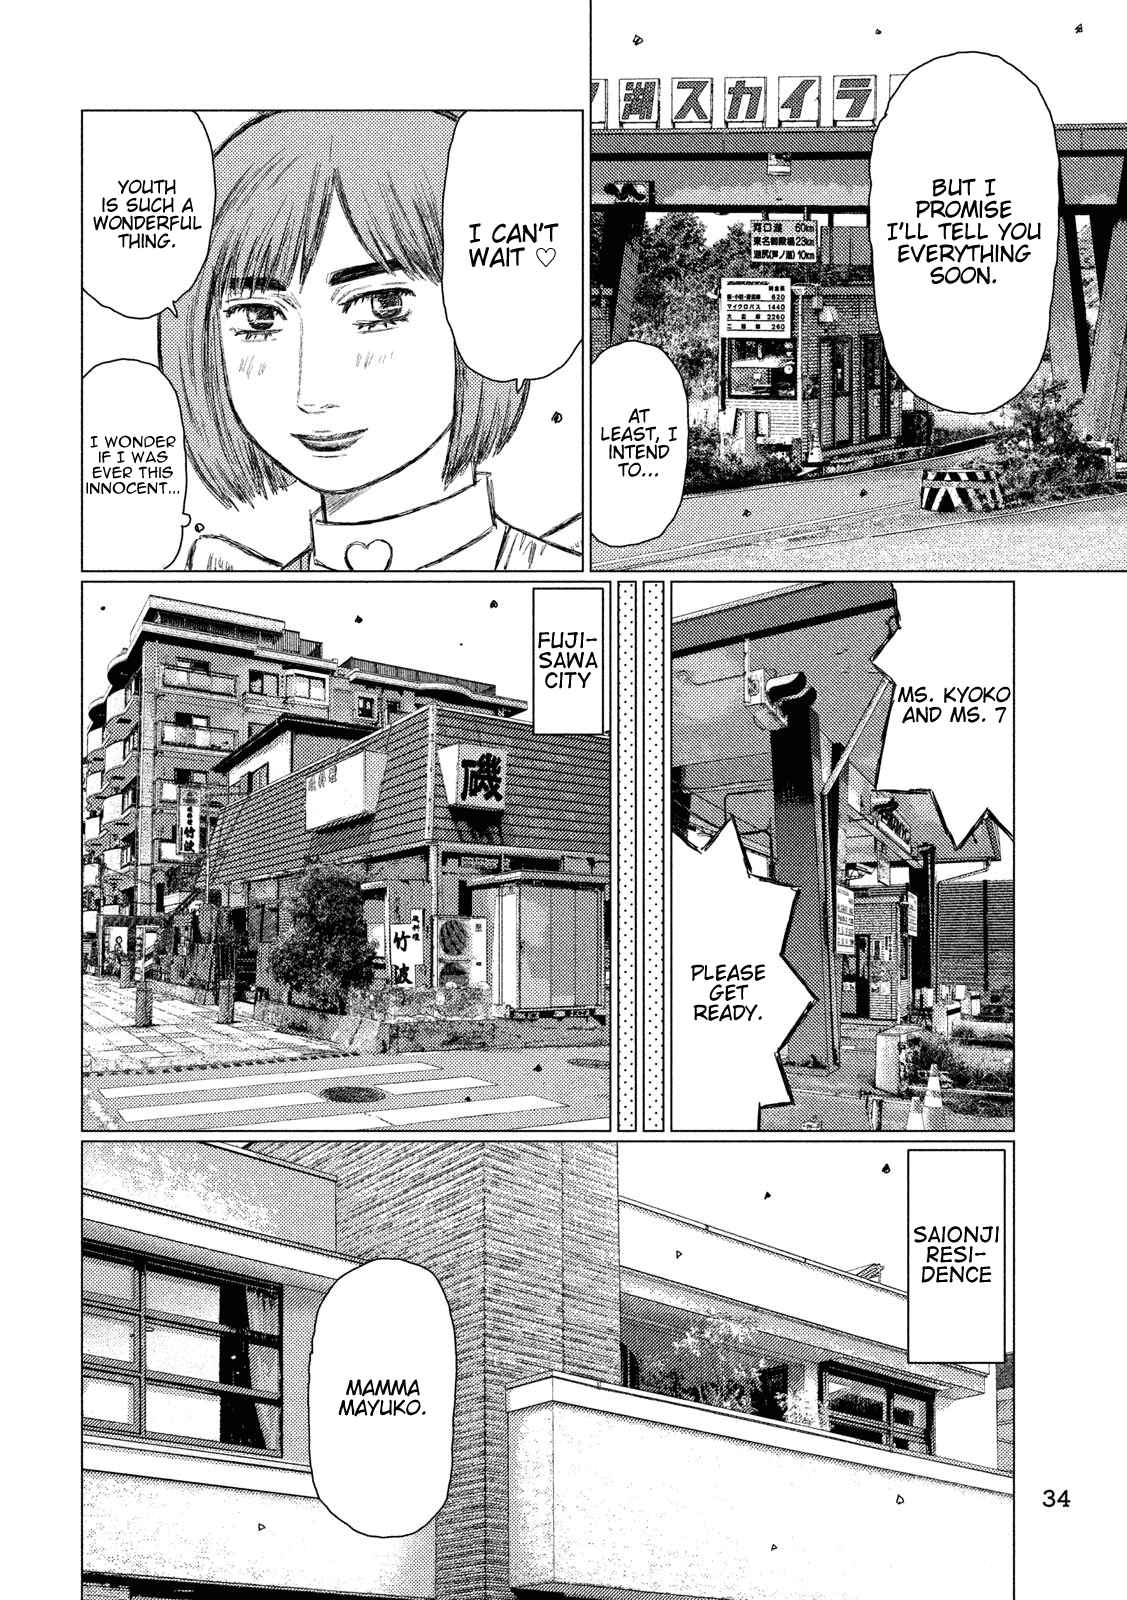 MF Ghost Vol. 5 Ch. 53 The Inherited Gift